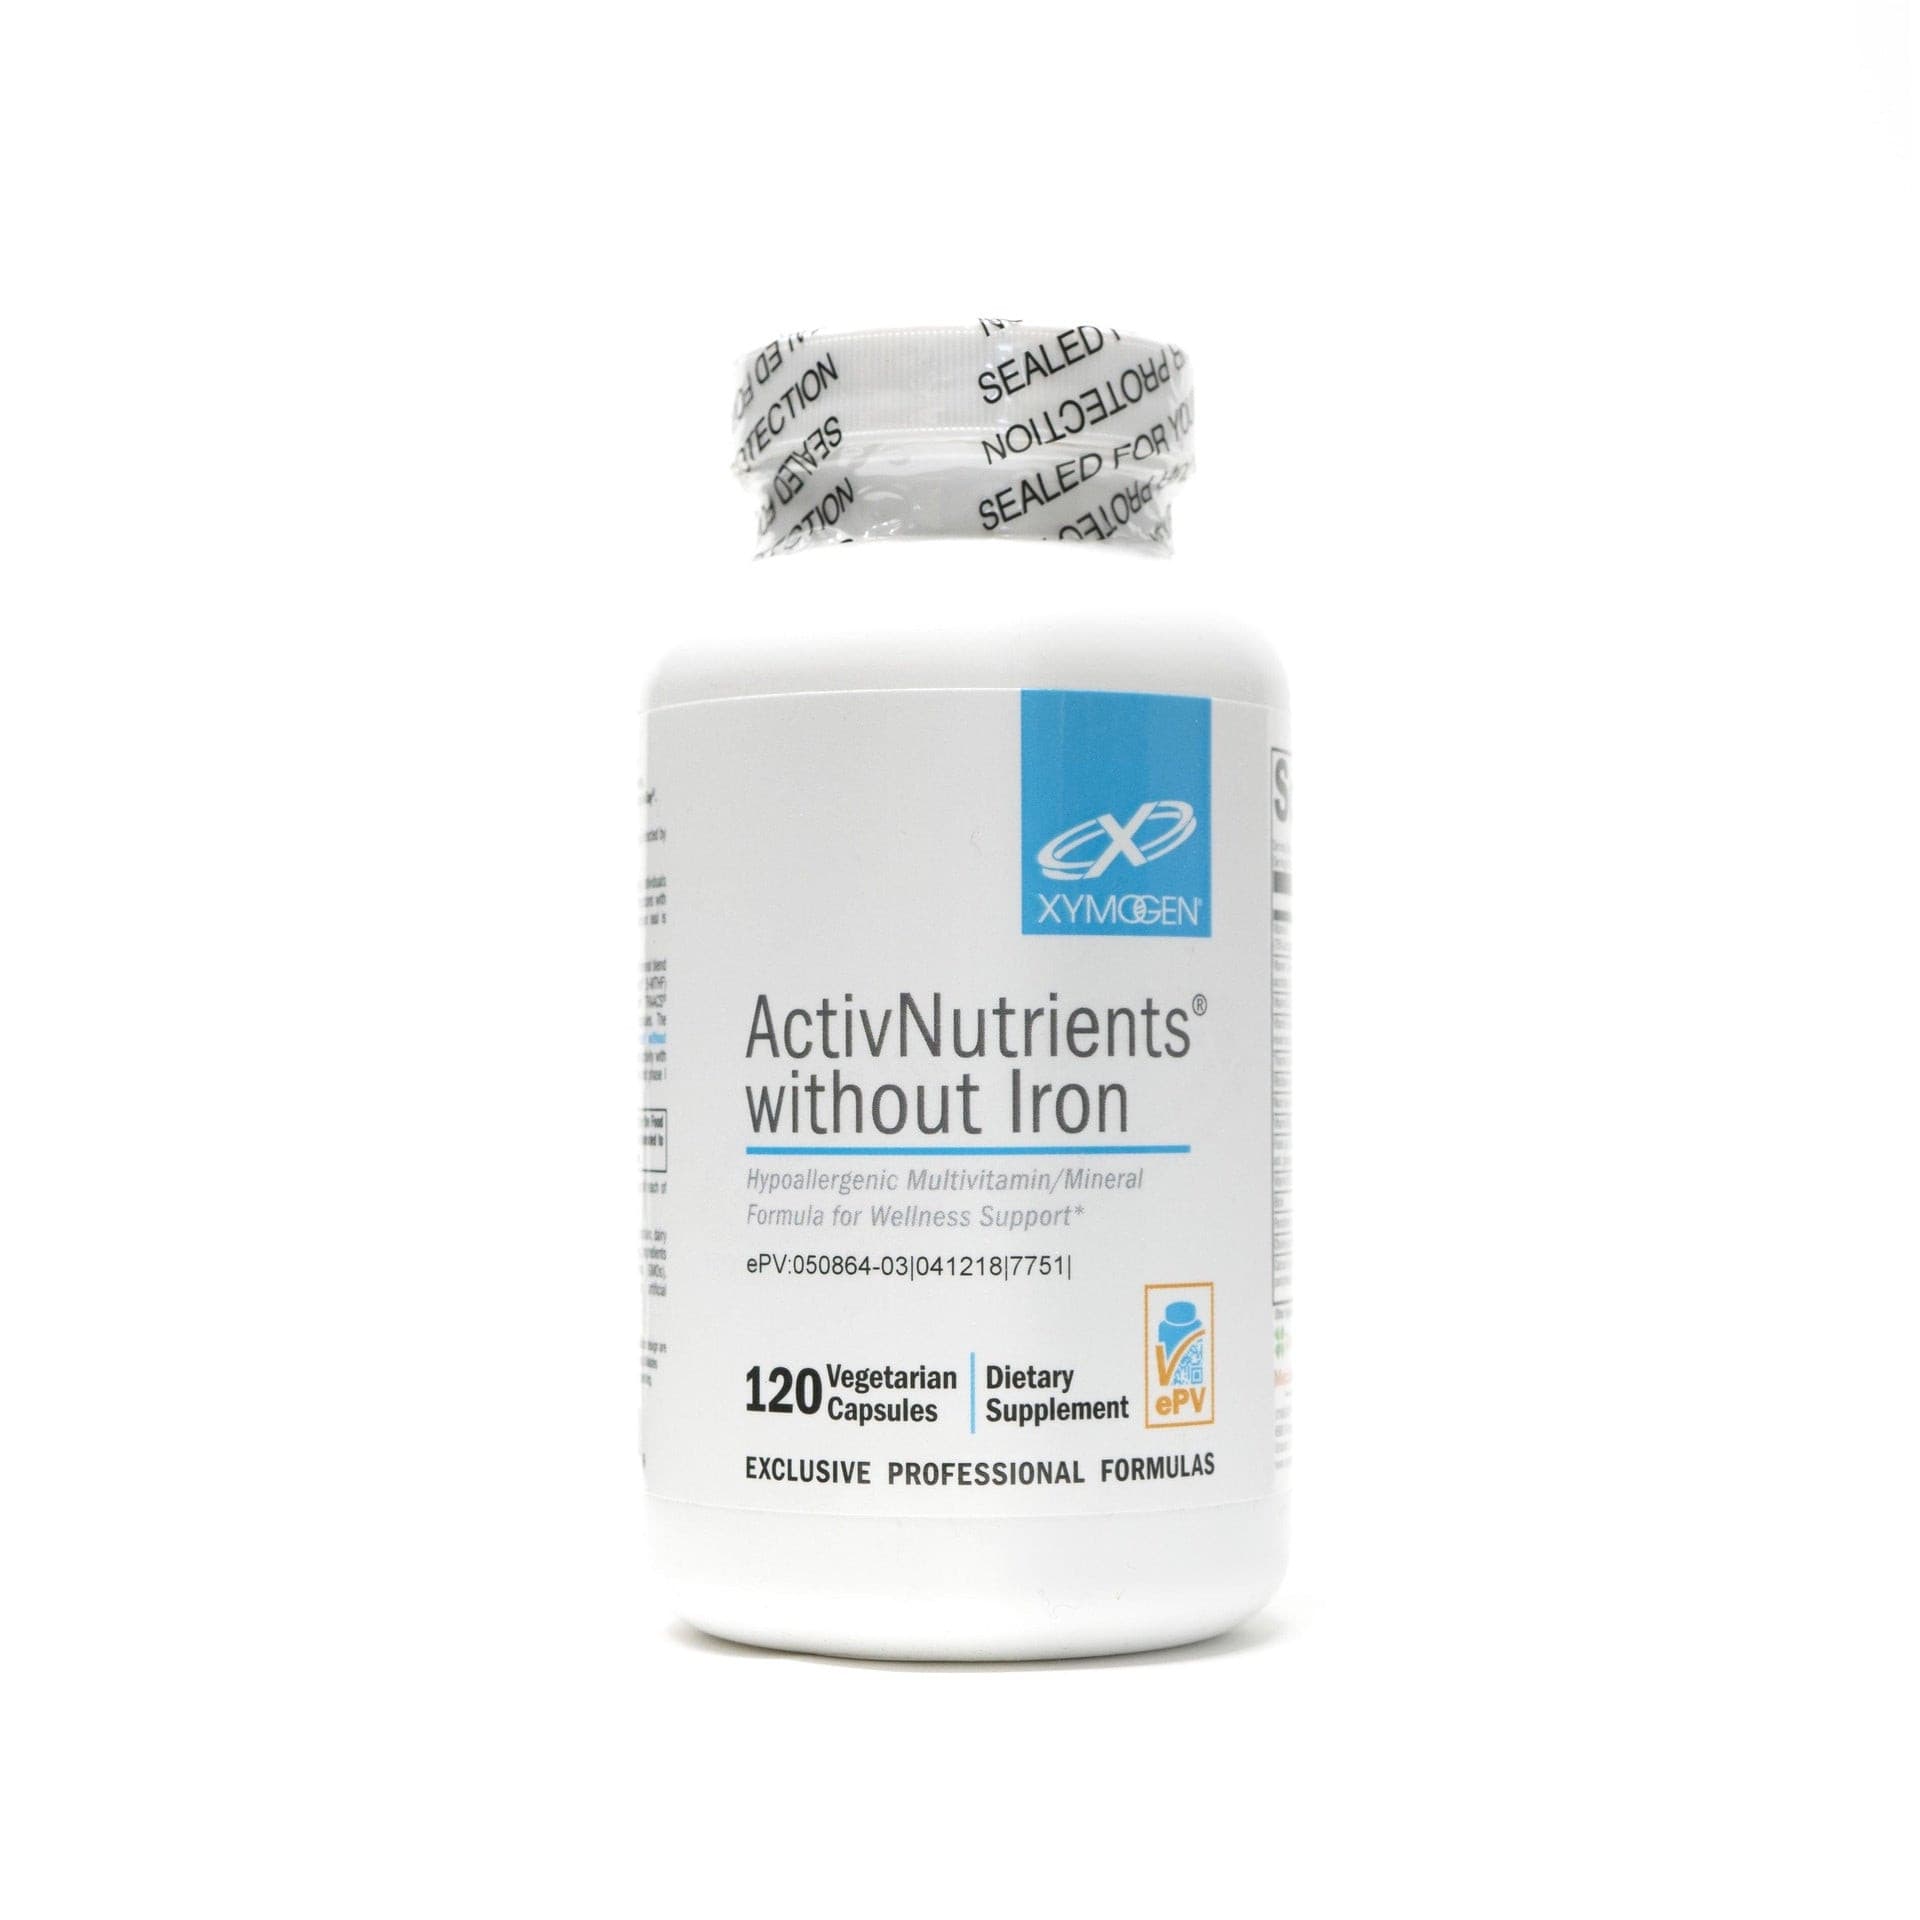 Activnutrients (without Iron).